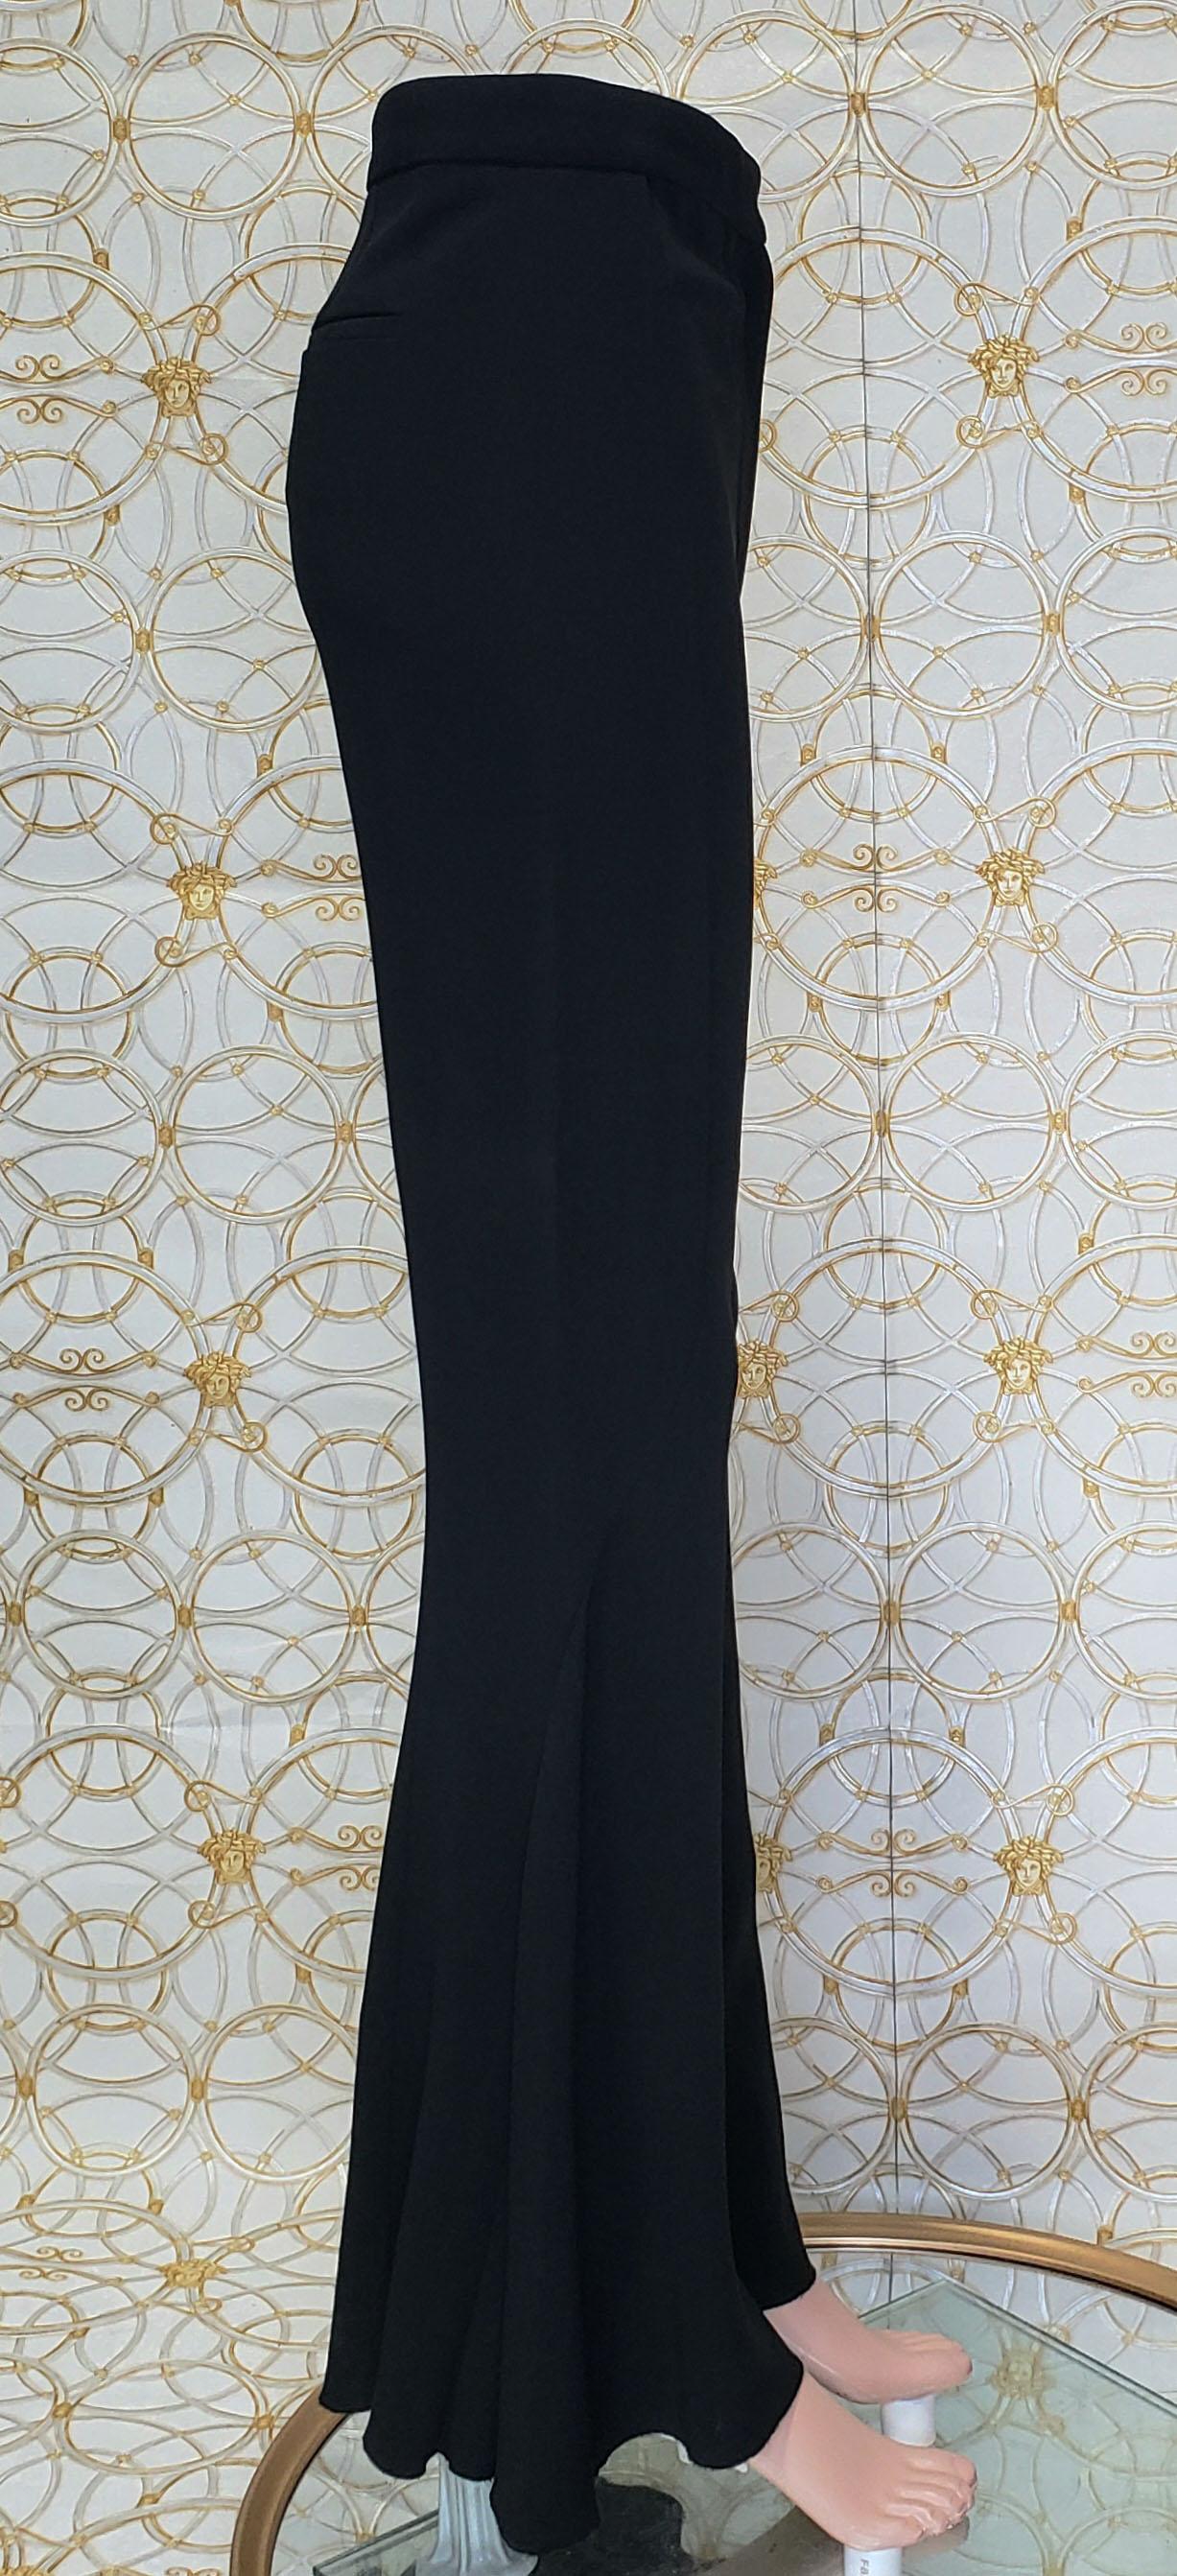 Women's F/W 2015 Look # 13 VERSACE BLACK FLARED PANTS size 38 - 4 For Sale